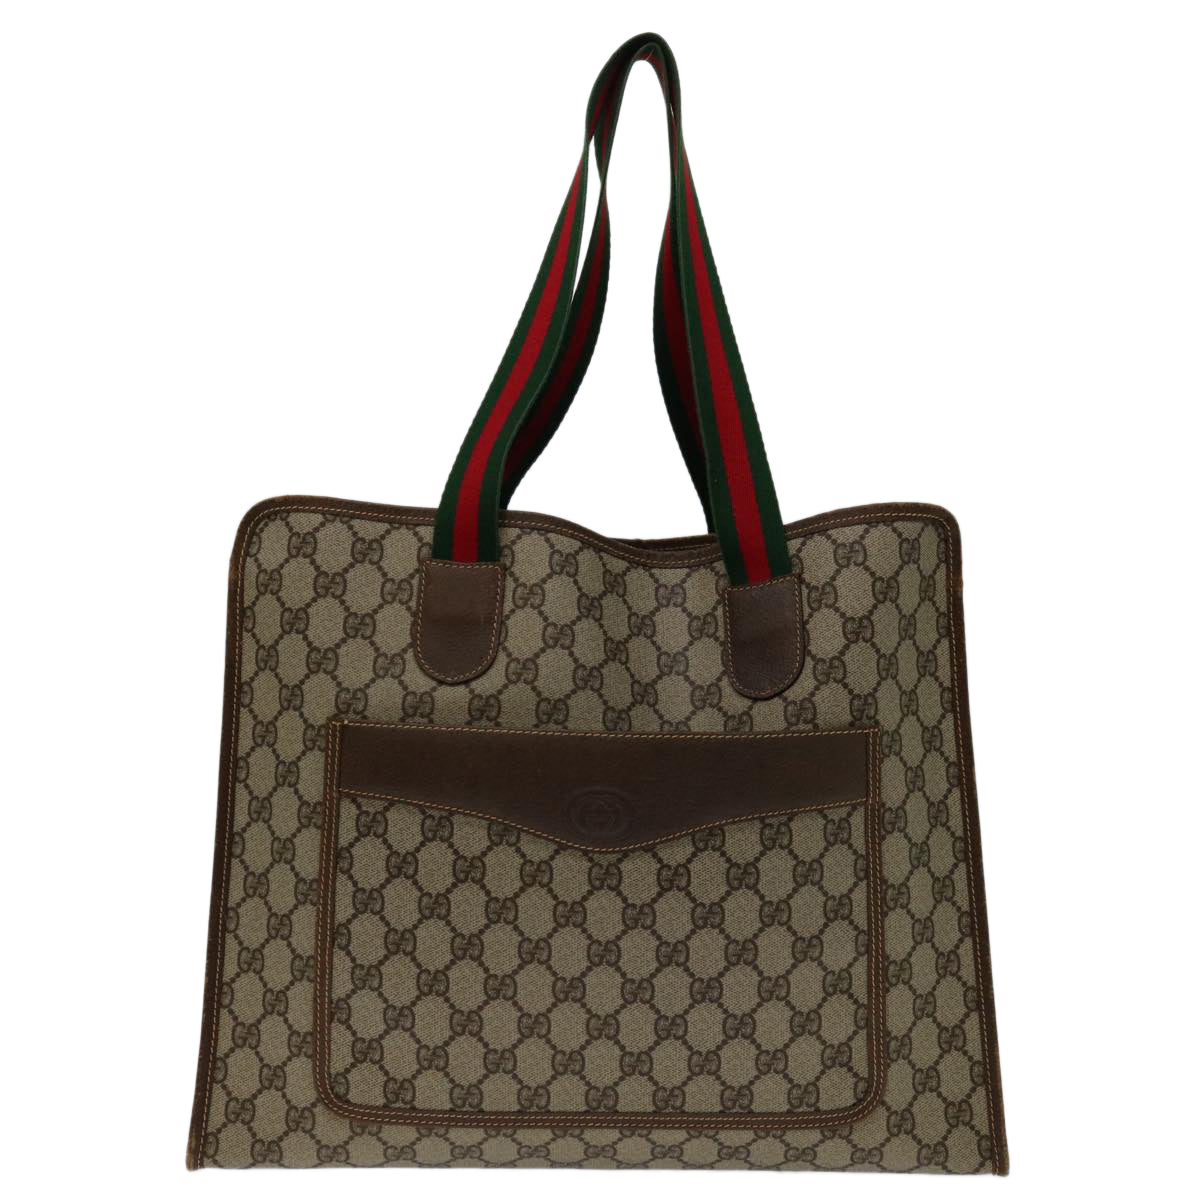 GUCCI GG Supreme Web Sherry Line Tote Bag Beige Red Green 002 123 Auth yk11337 - 0